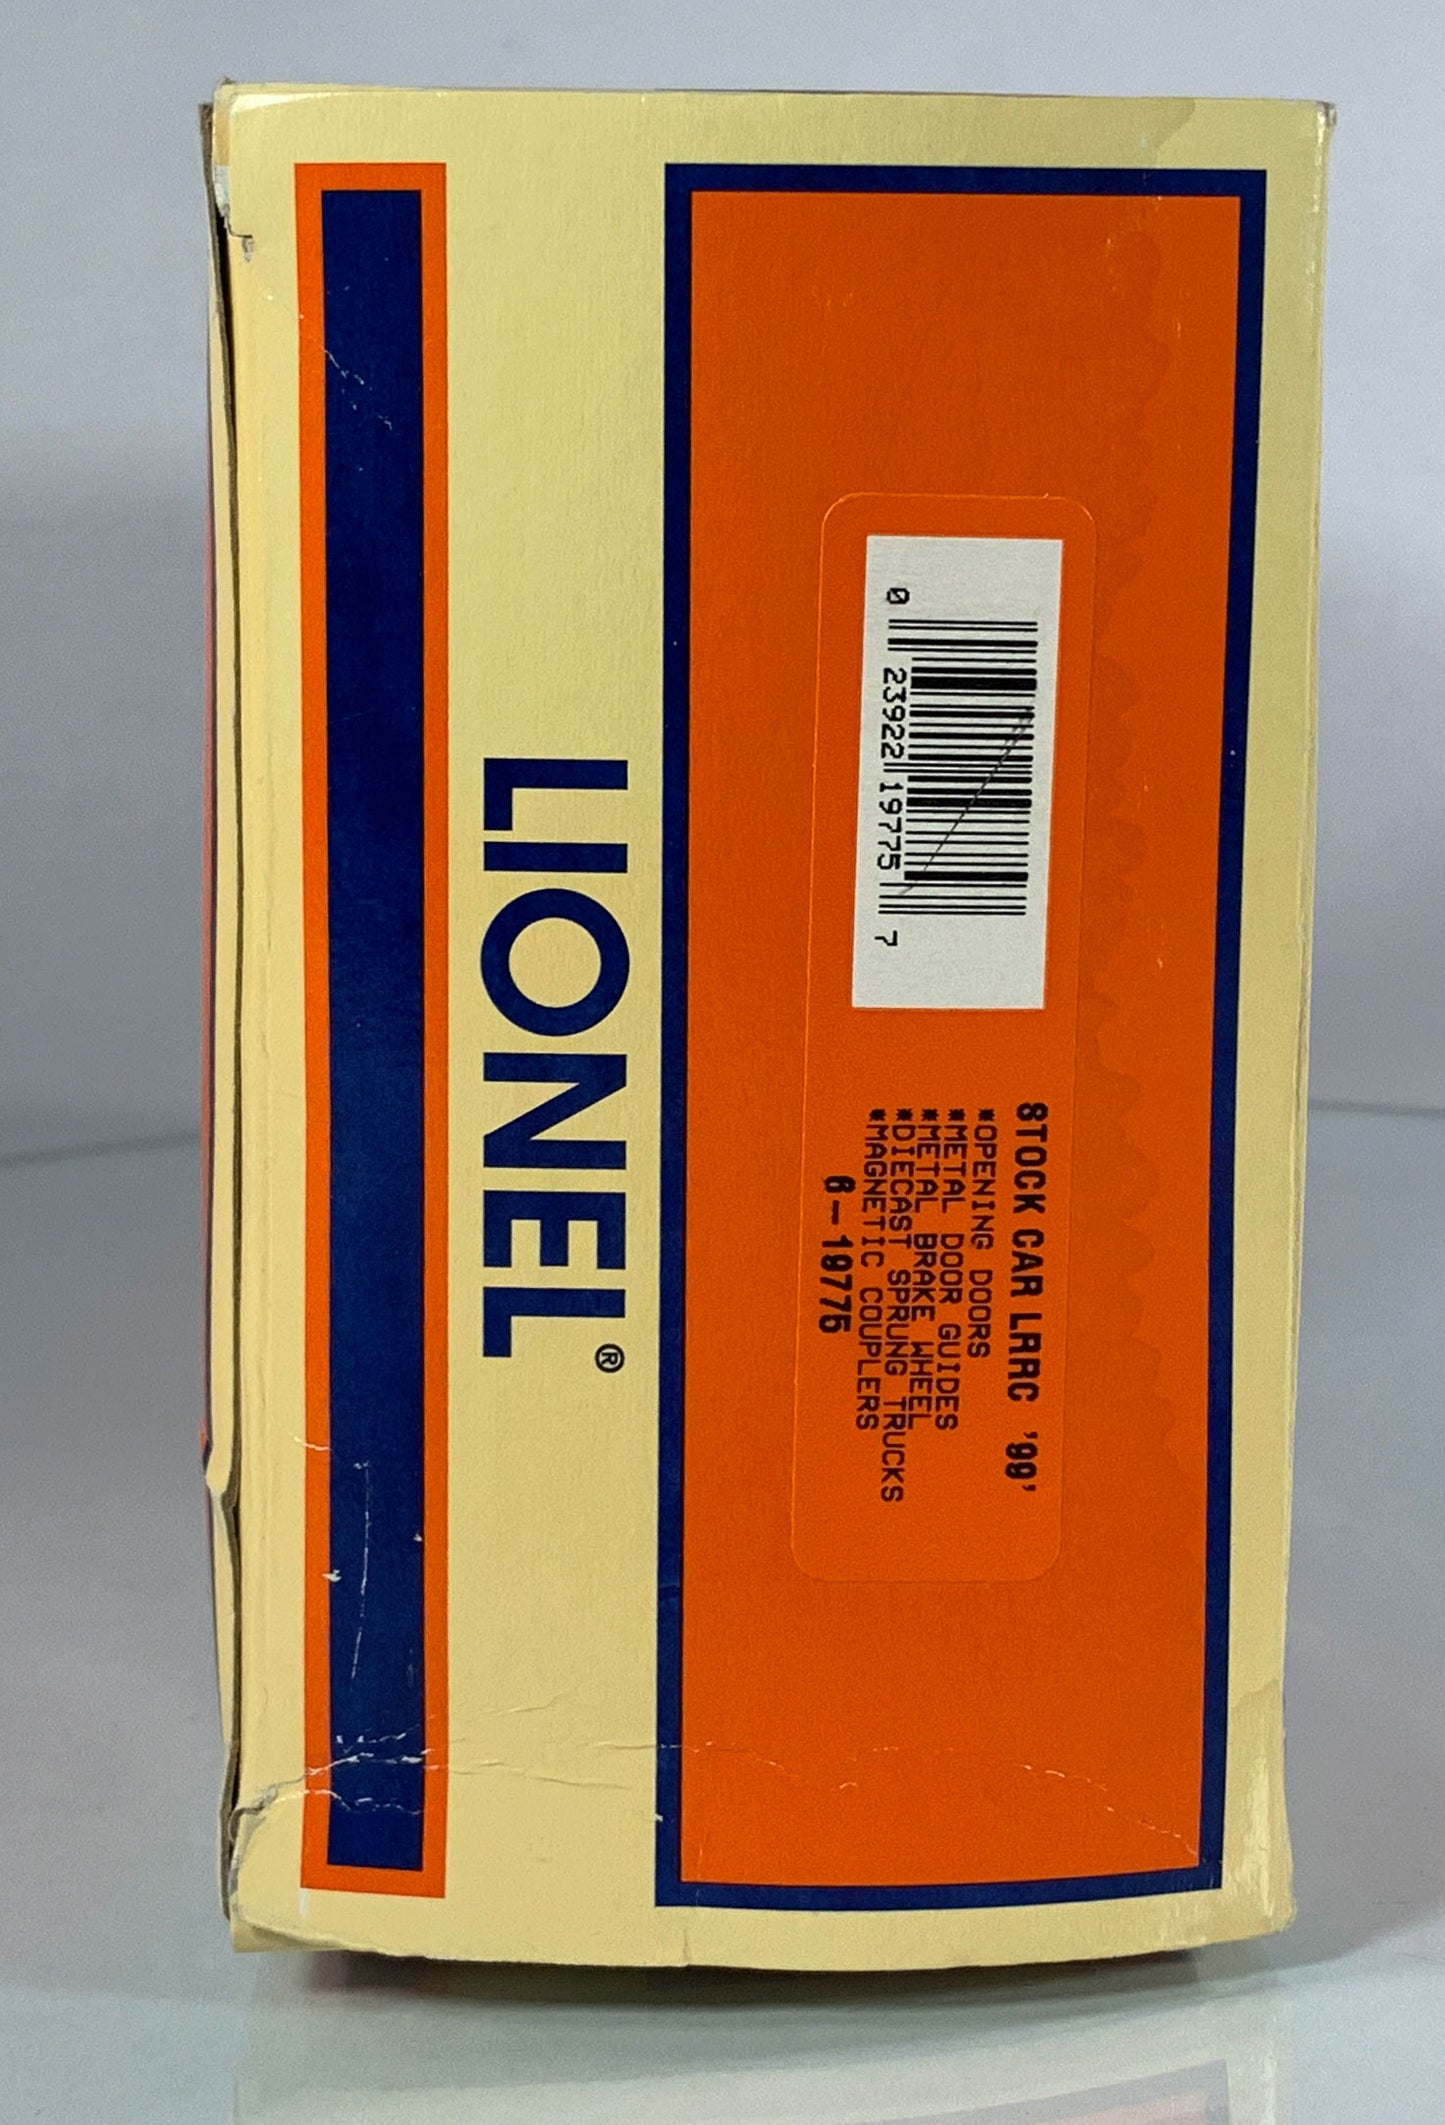 LIONEL • O GAUGE • 1999 LRRC Stock Car 6-19775 • NEW OLD STOCK